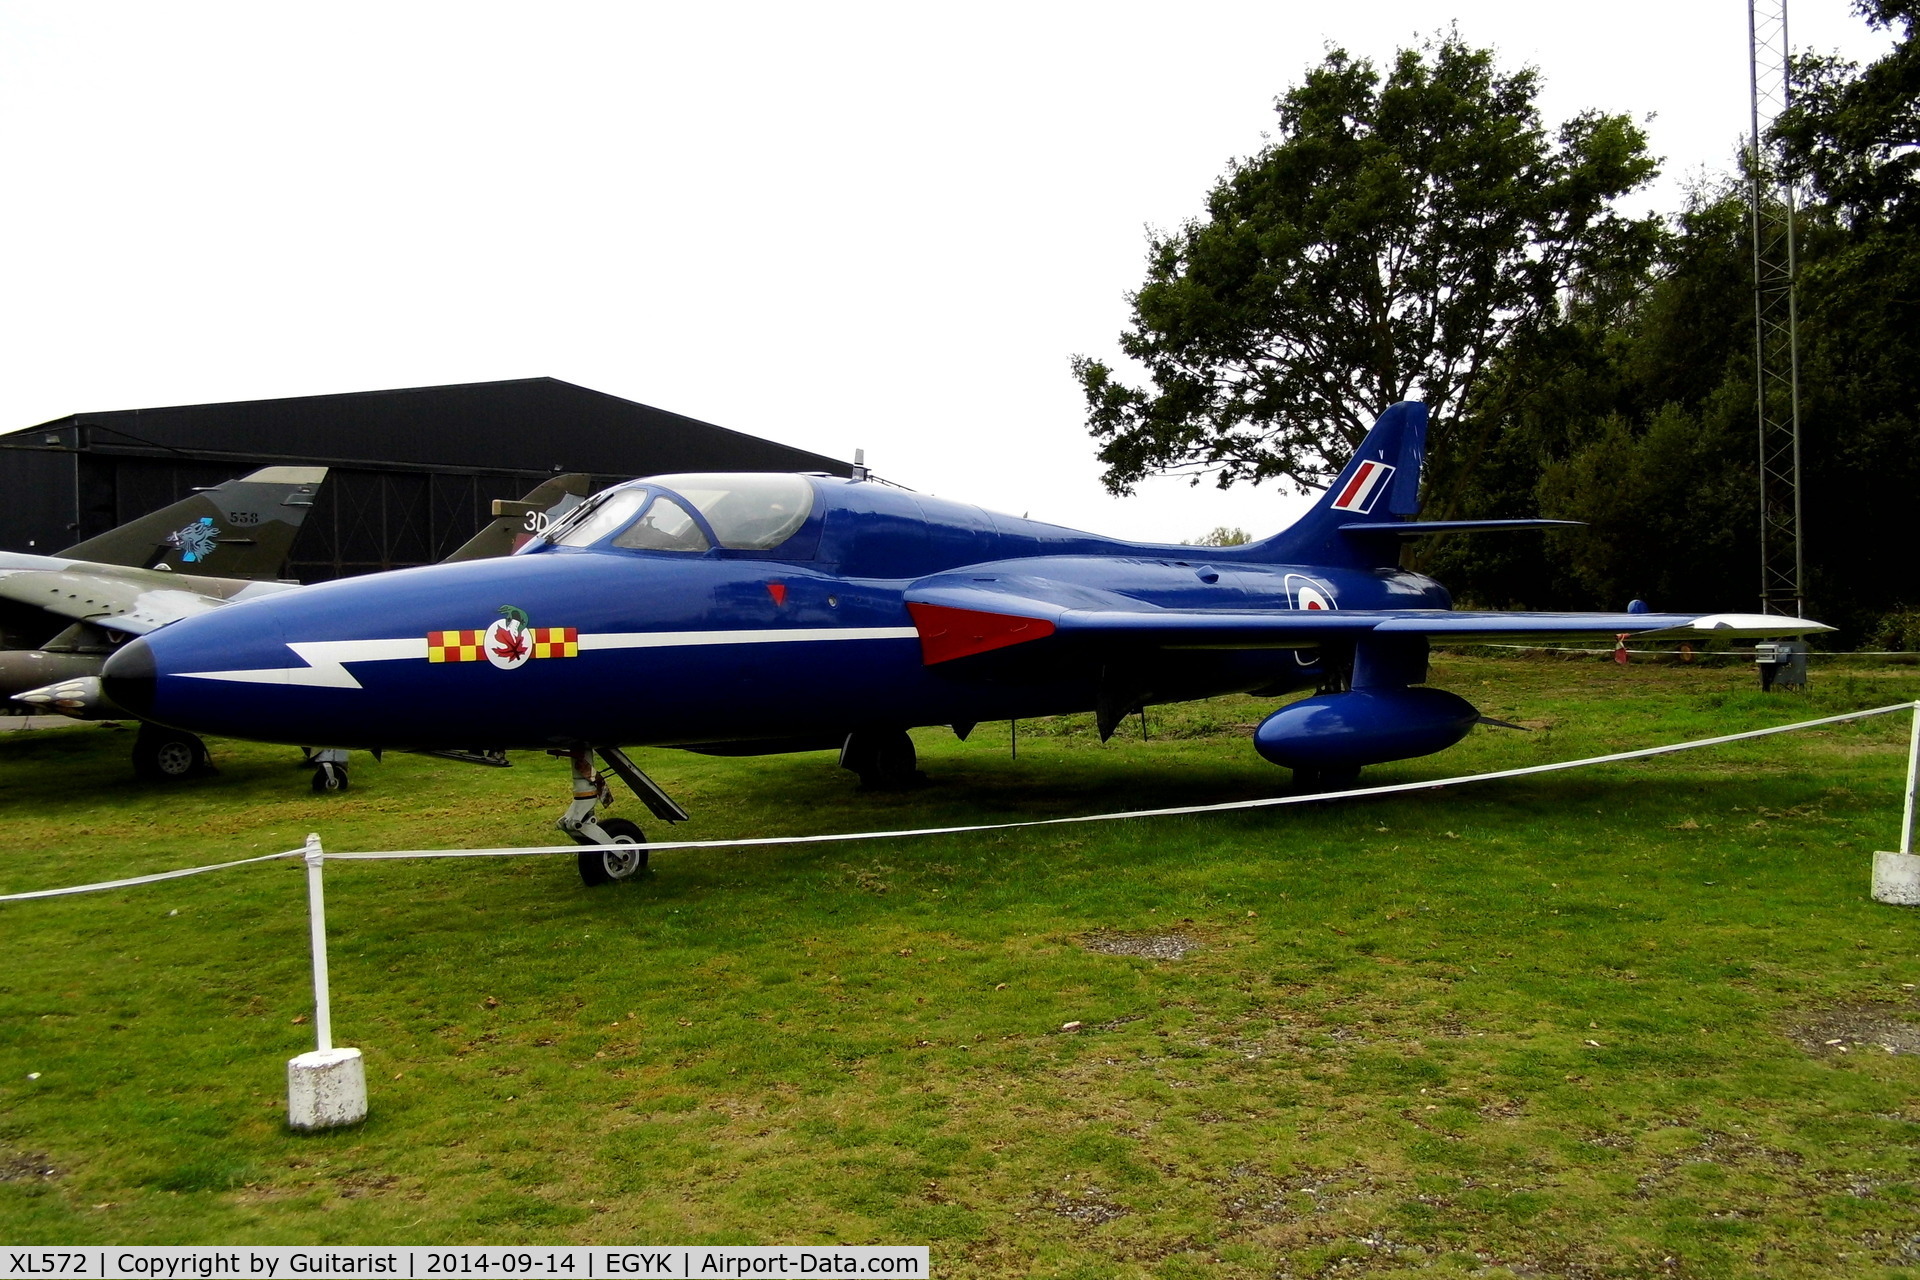 XL572, Hawker Hunter T.7 C/N HABL-003311, On display at the York Air Museum